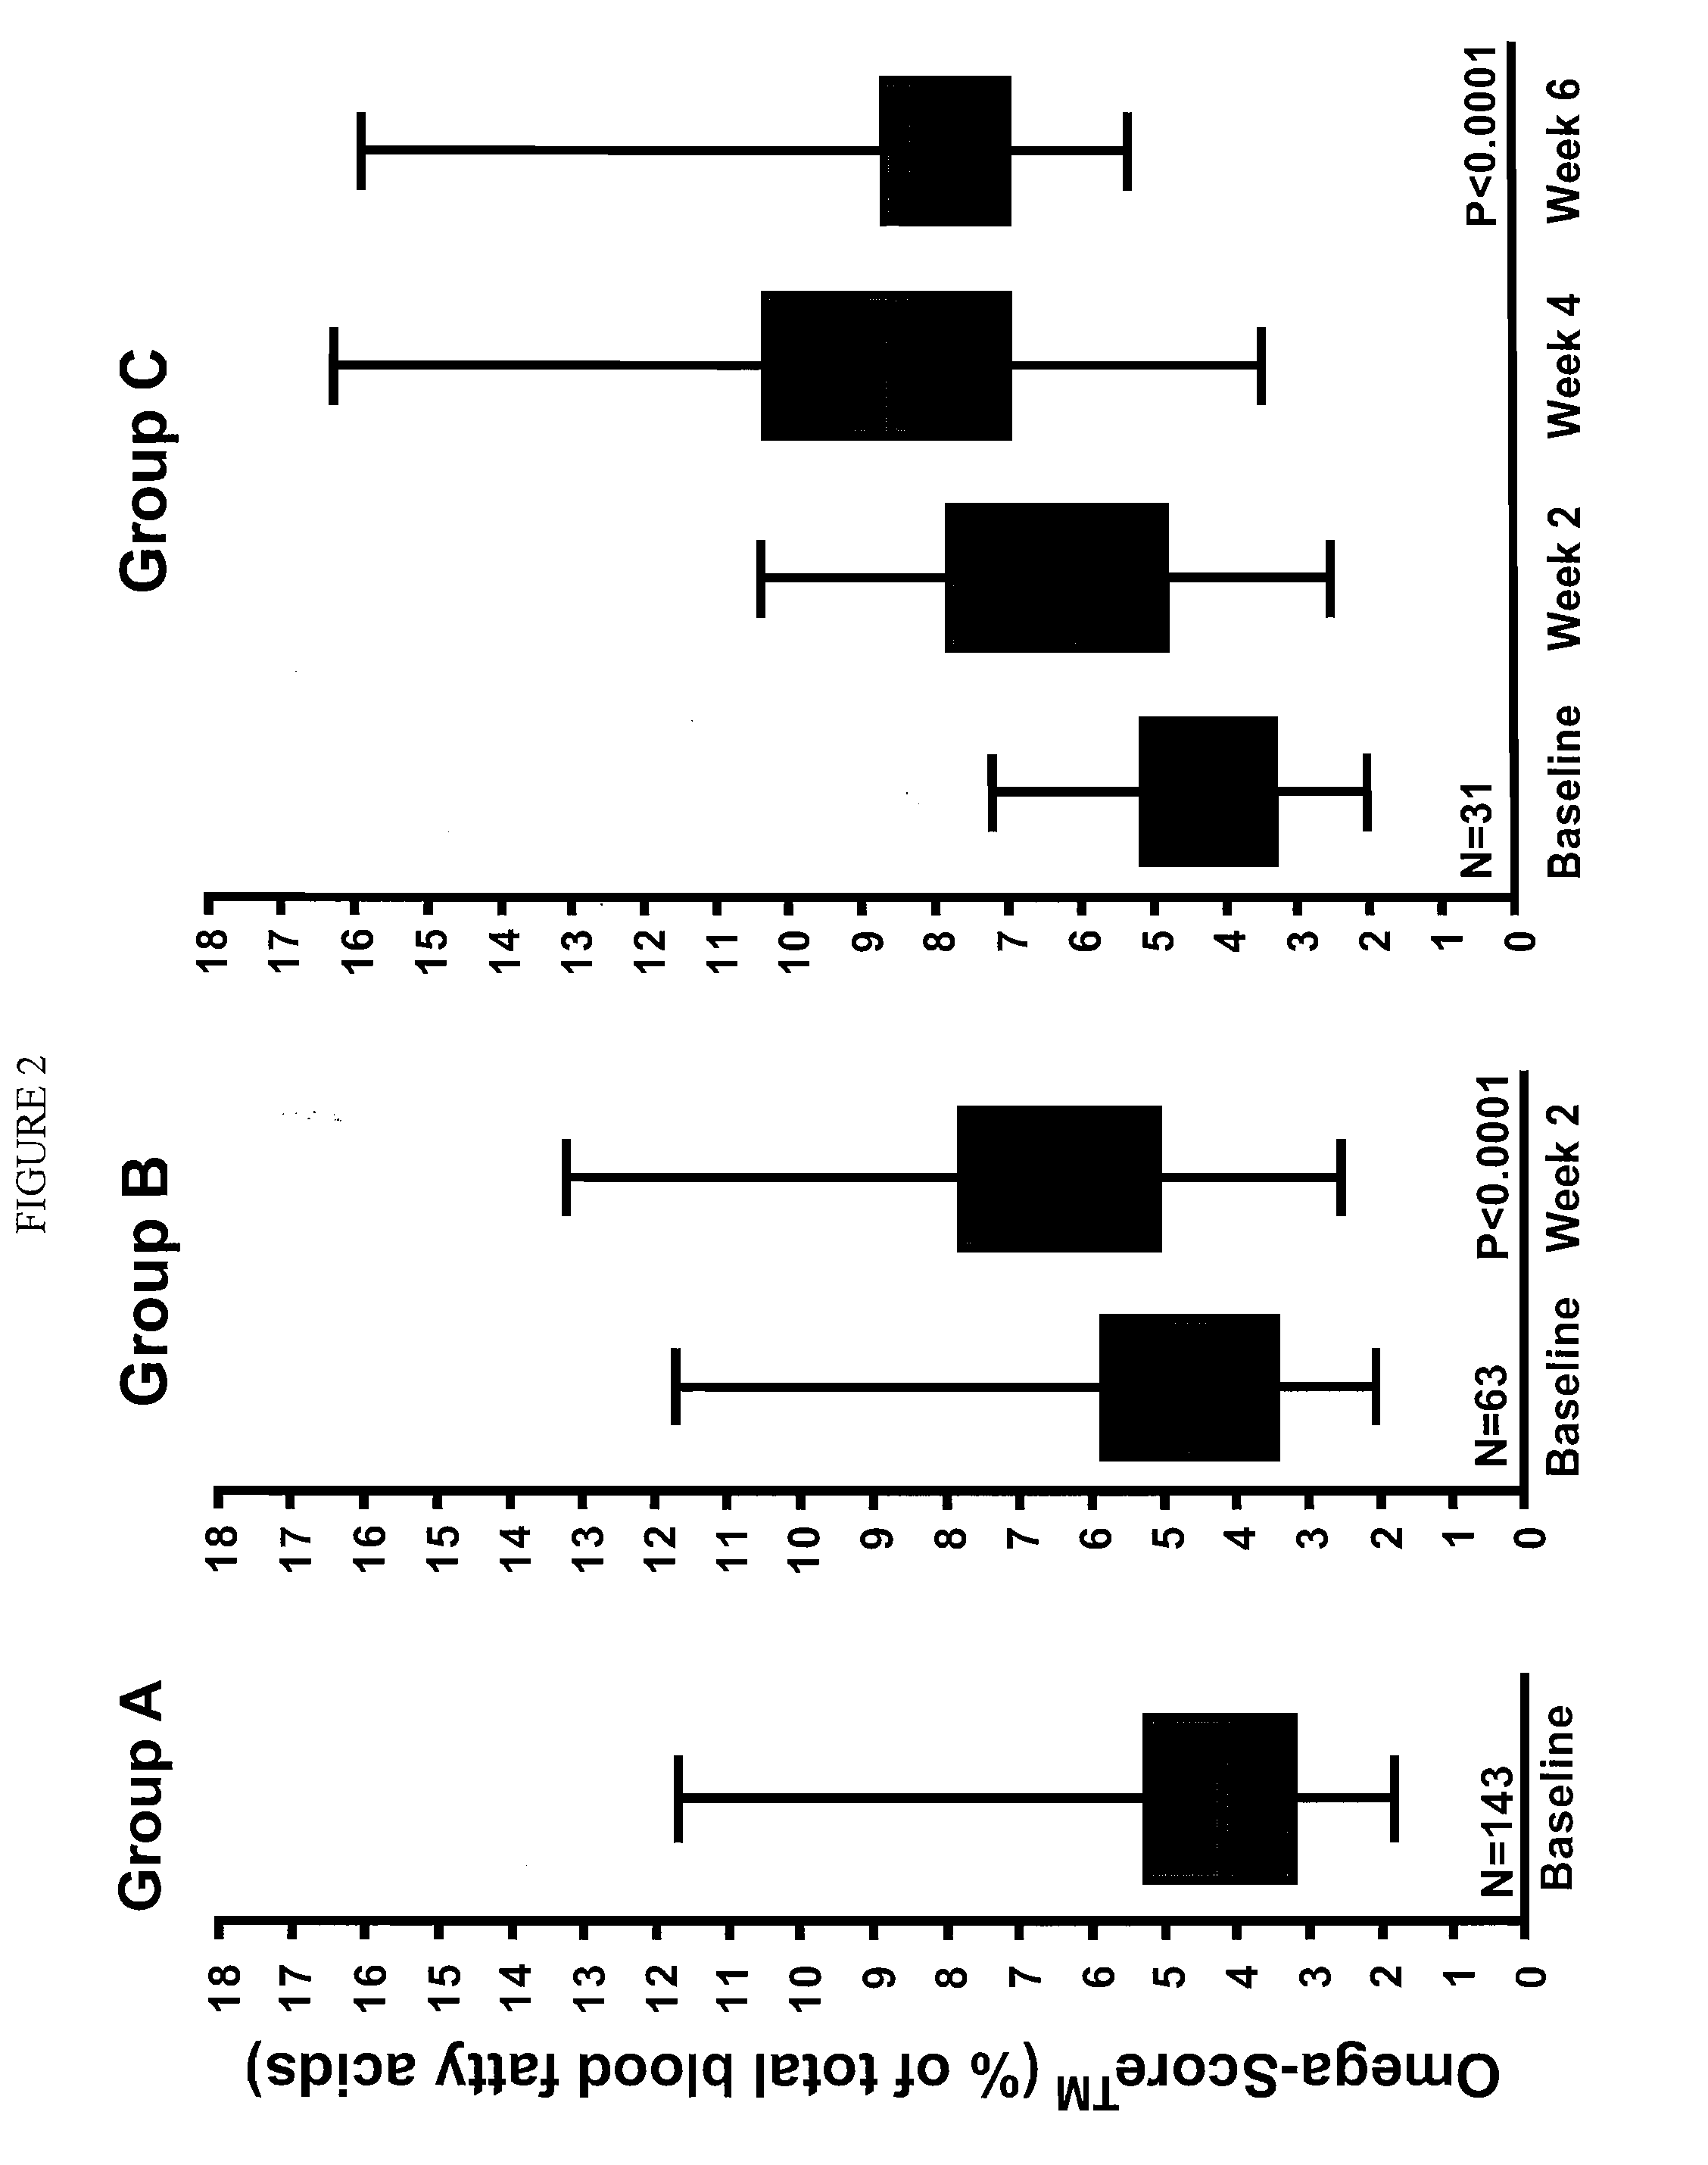 Method for treating obesity with Anti-obesity formulations and omega 3 fatty acids for the reduction of body weight in cardiovascular disease patients (CVD) and diabetics